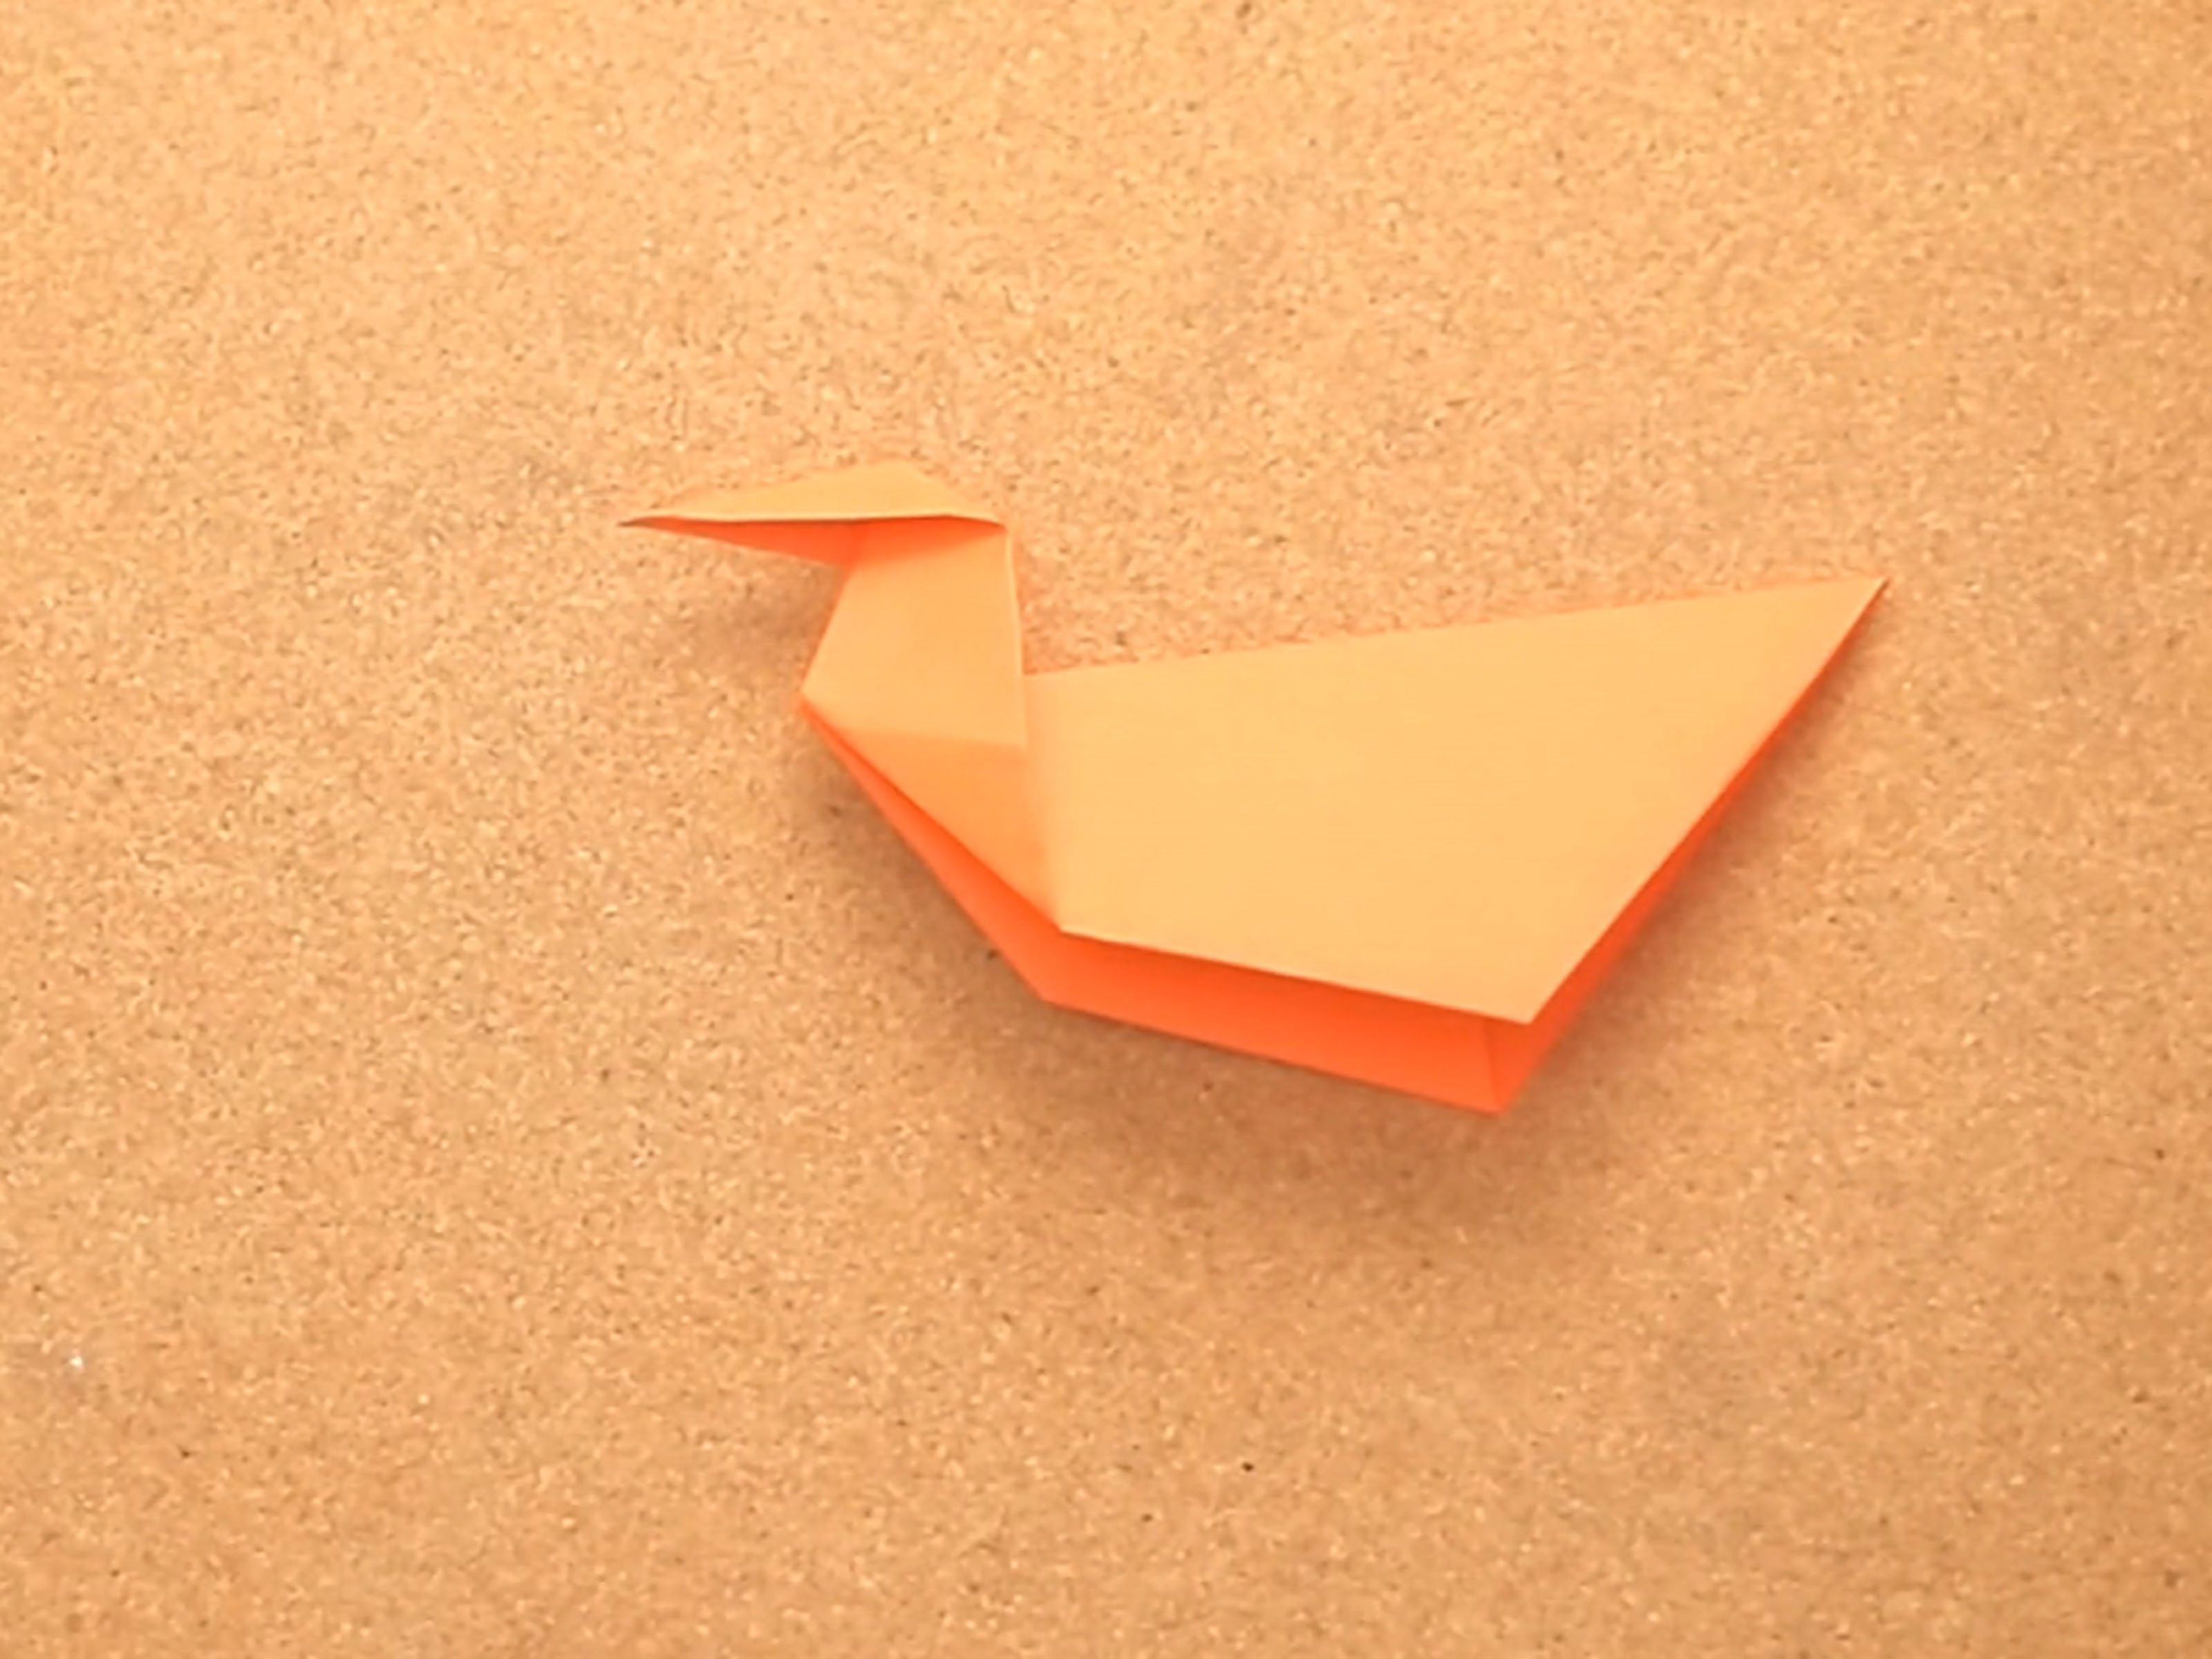 How To Make Origami Duck How To Fold An Origami Duck 11 Steps With Pictures Wikihow